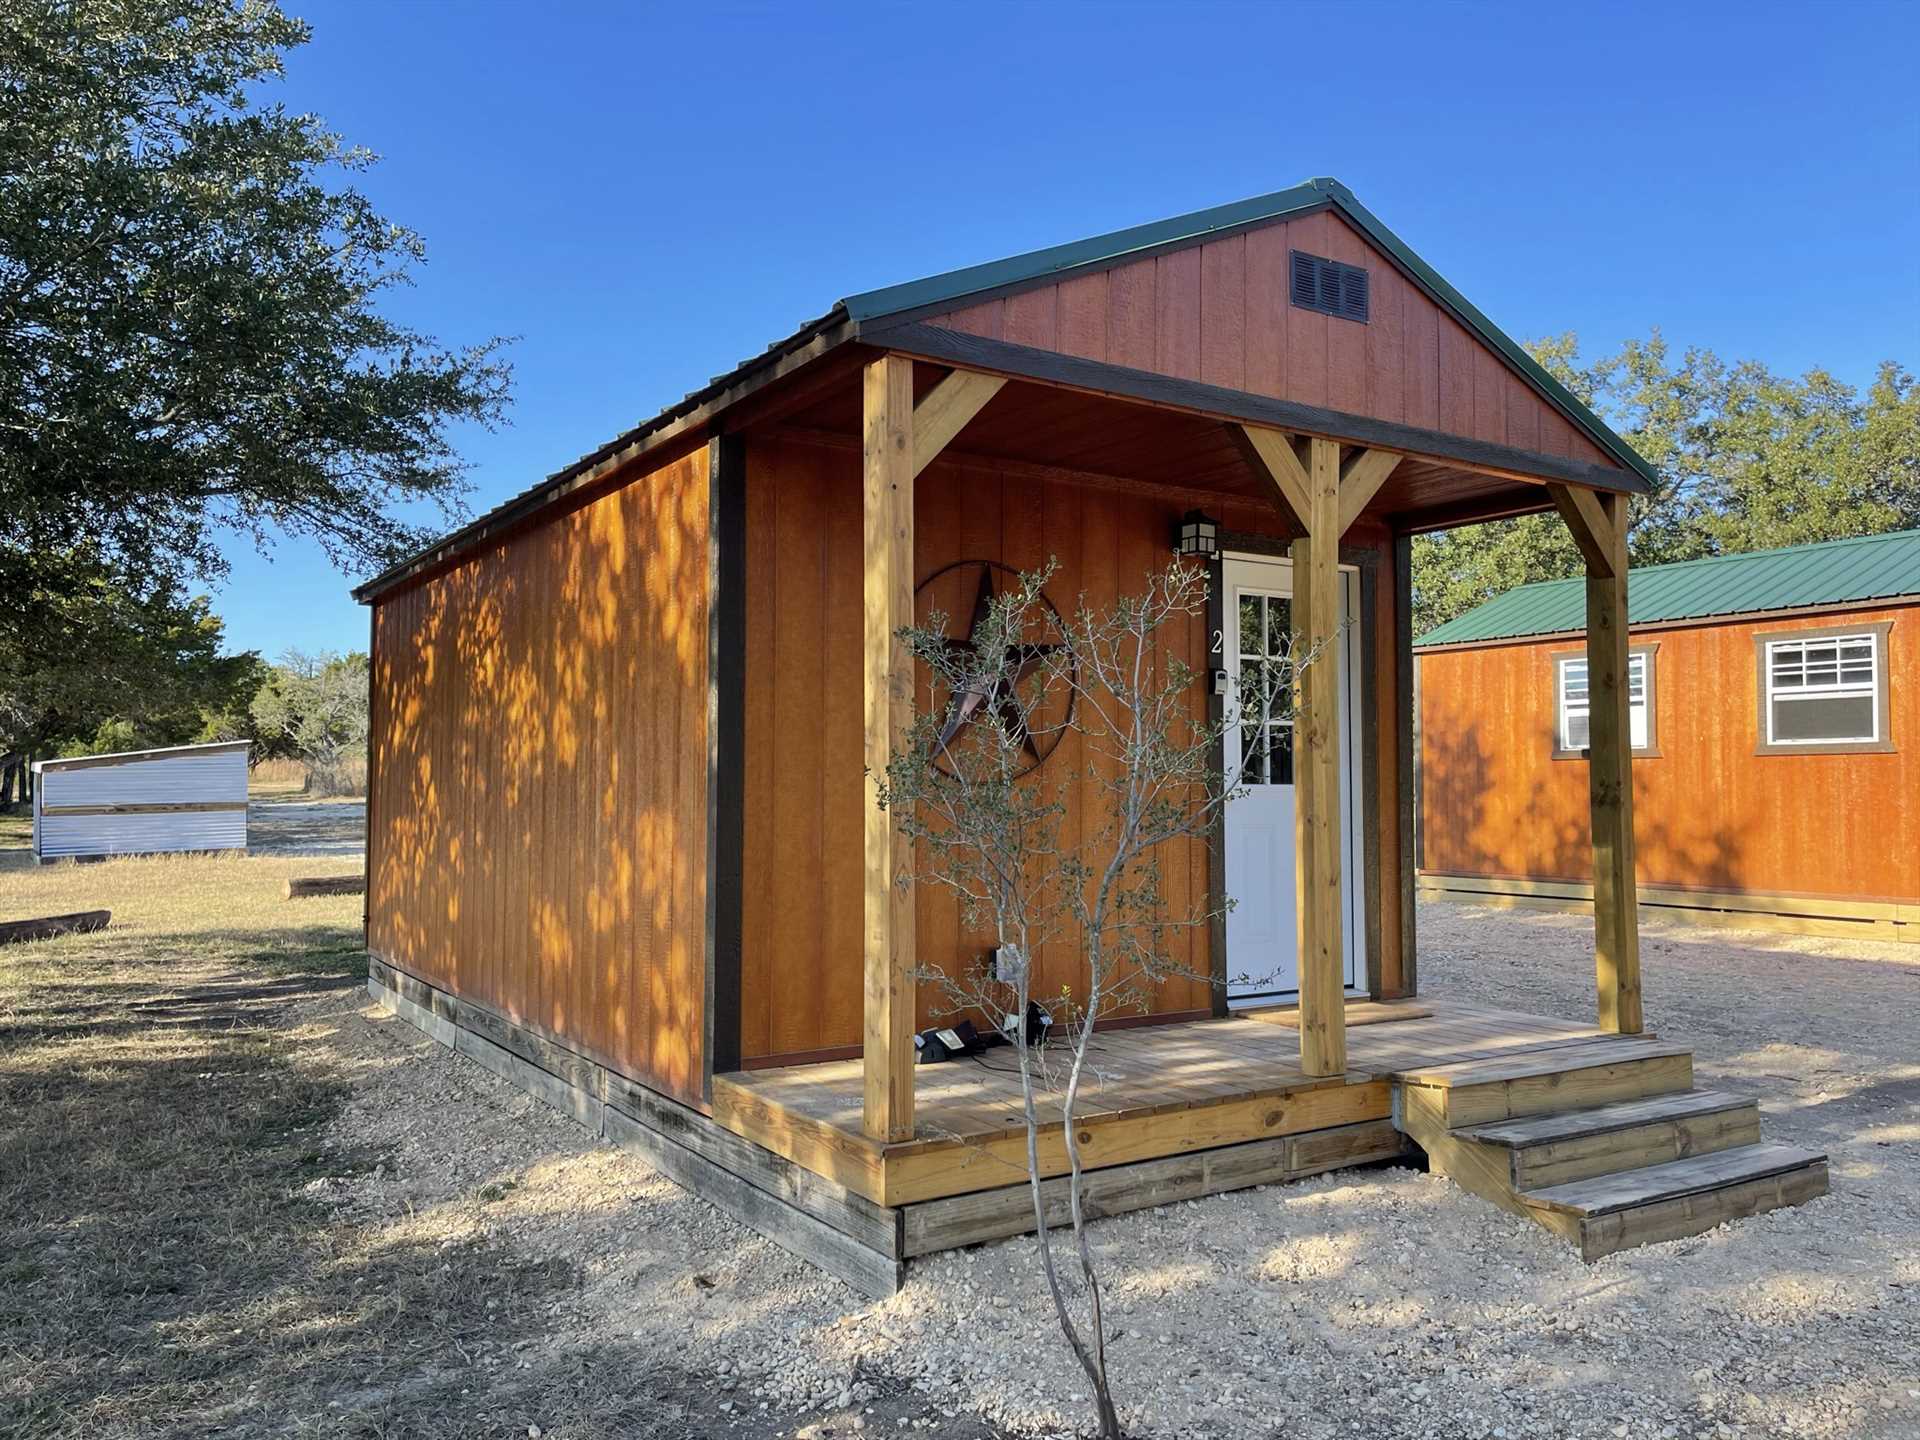                                                 Make the Great Heart Ranch Edwards Cabin your intimate home for a Hill Country getaway! The cabin comfortably sleeps up to three.